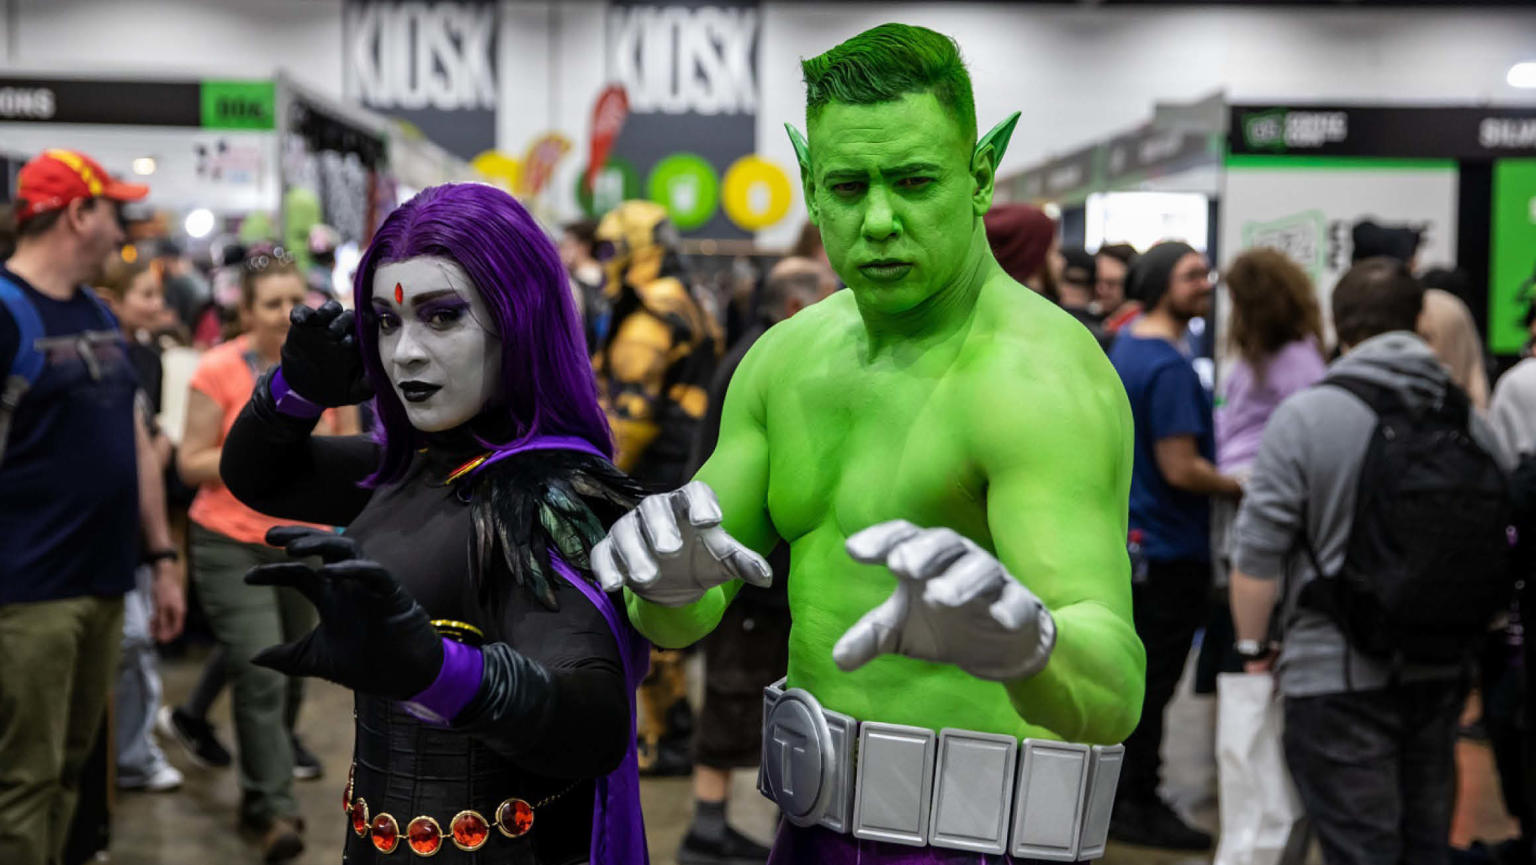 An image showing two people, a man and a woman dressed up at Comic Con. The woman is wearing a purple wig and black costume with a purple cape and red jewelled belt. The man is painted green with elf ears and silver gloves and a belt. 